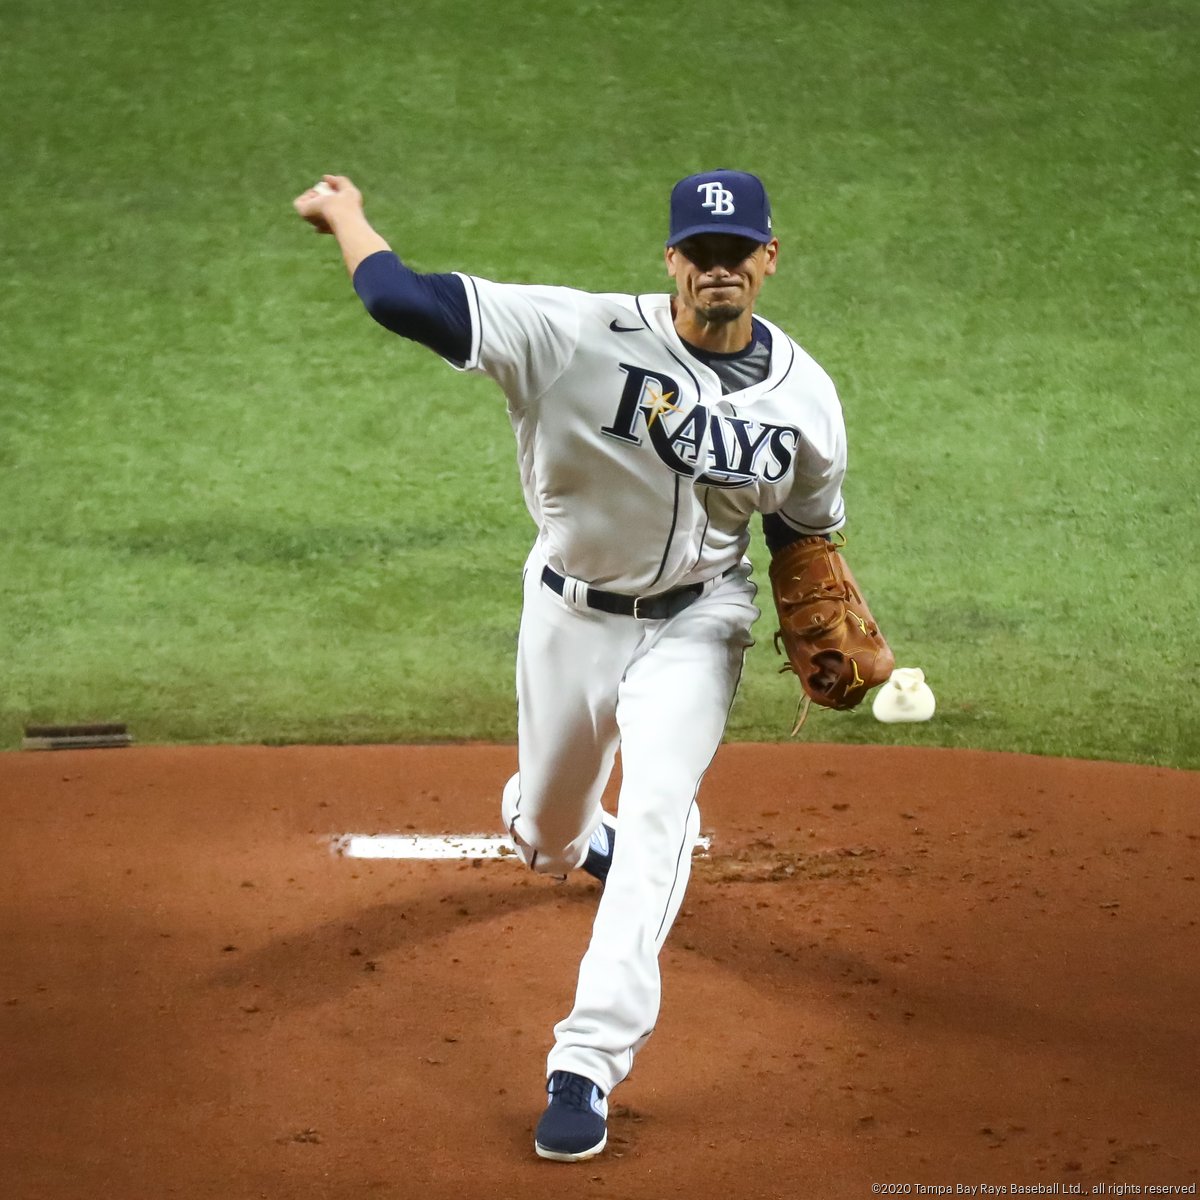 Tampa Bay Rays cost per win for 2020 season - Tampa Bay Business